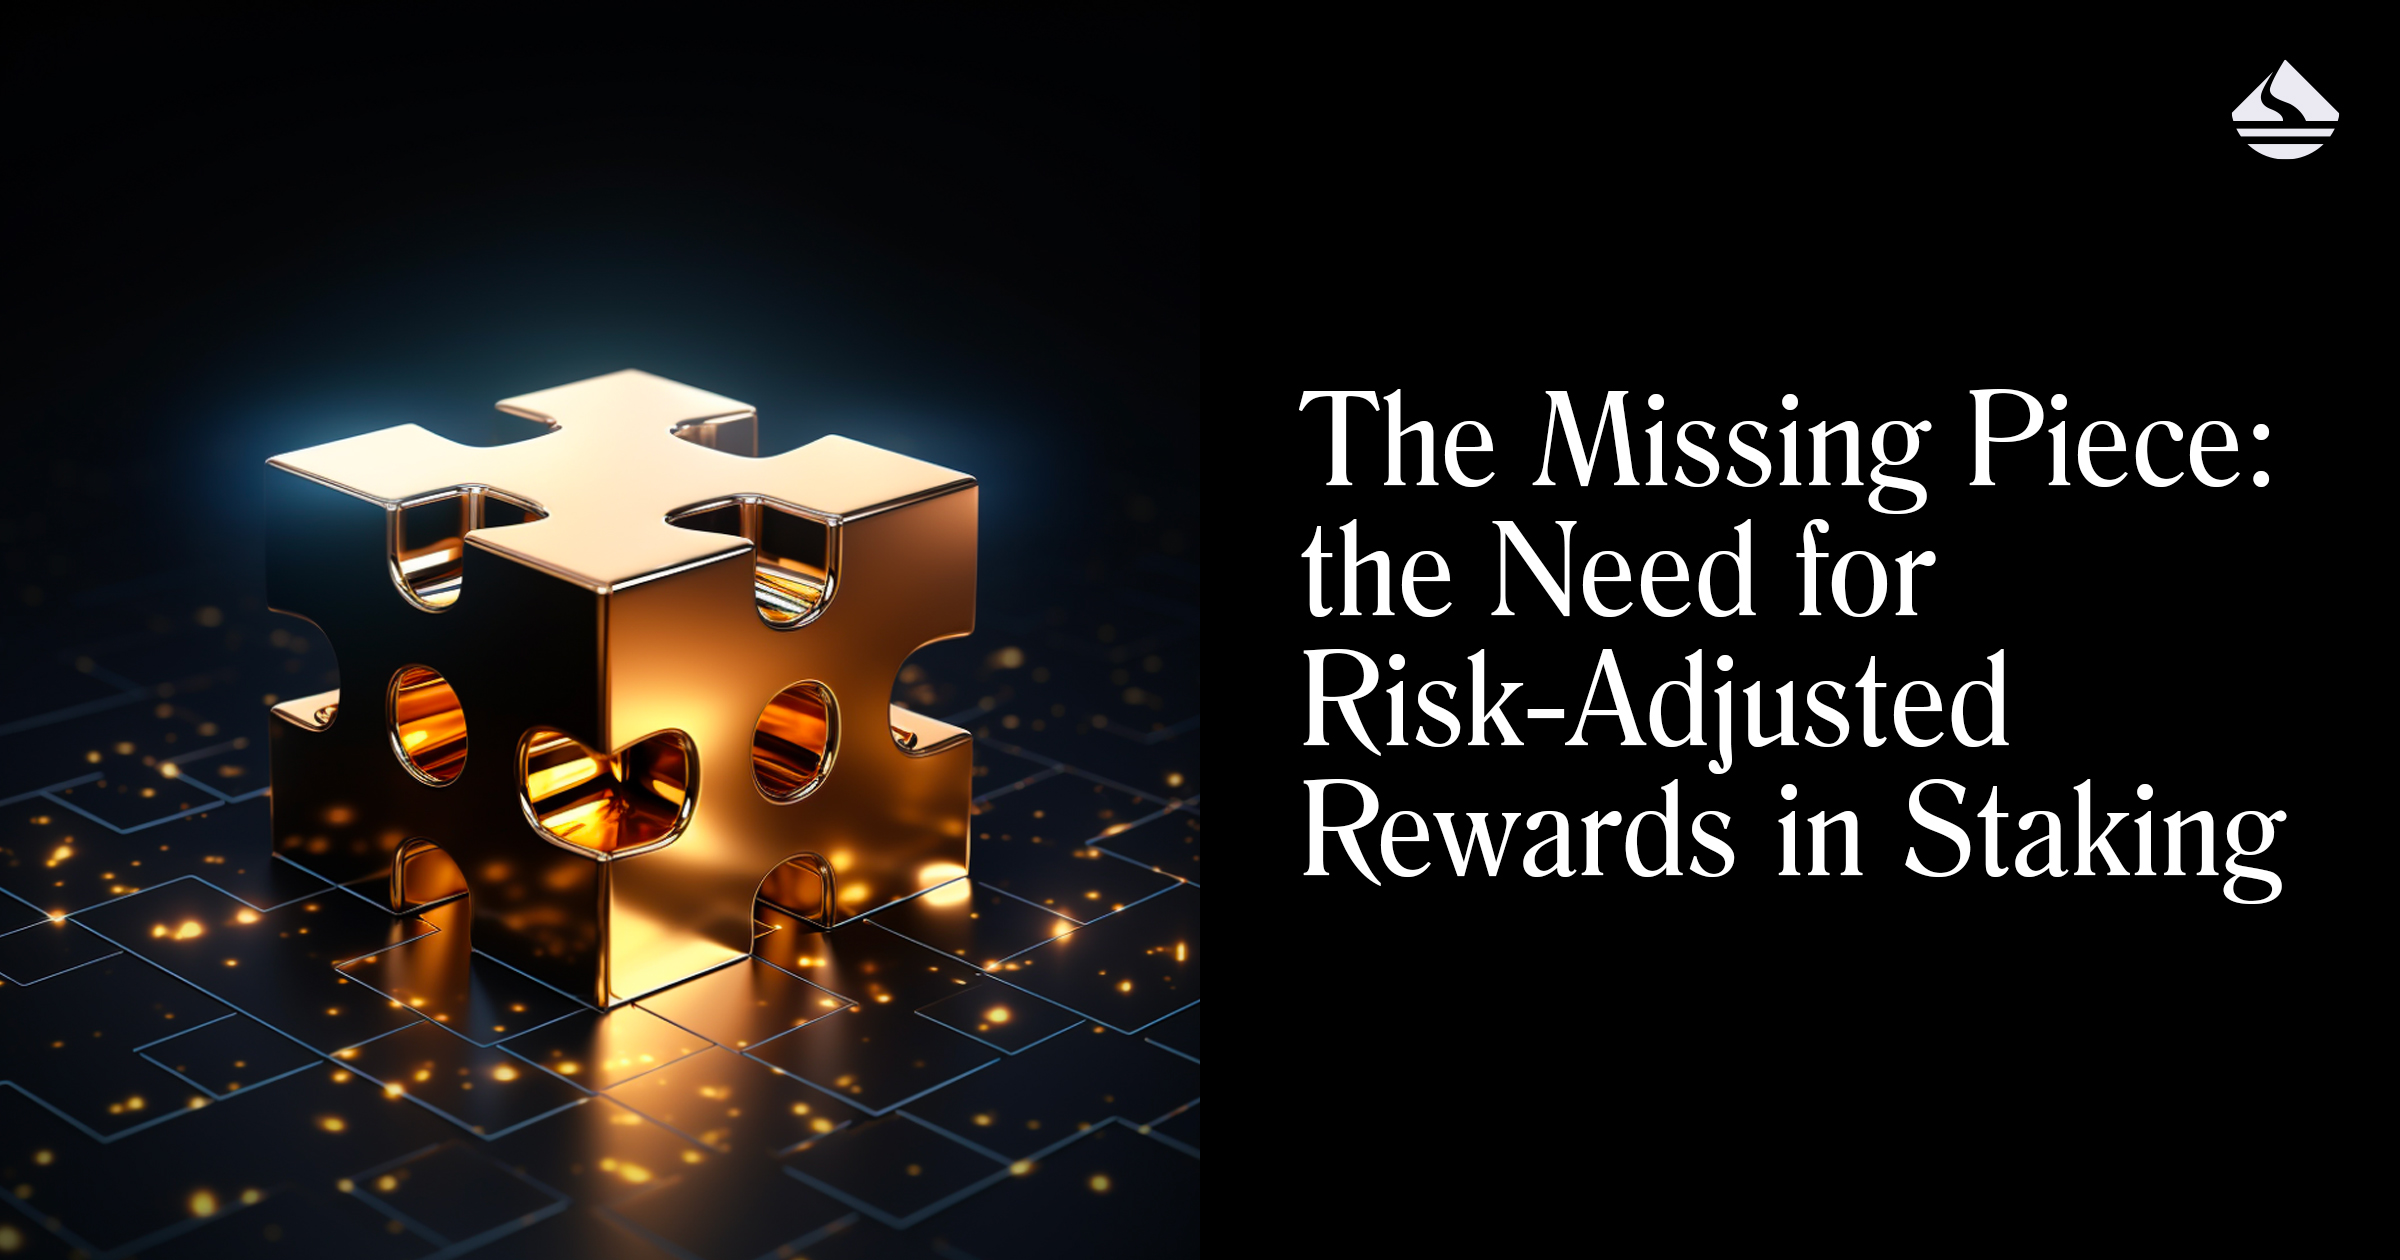 Alluvial: The Missing Piece: the Need for Risk-Adjusted Rewards in Staking 